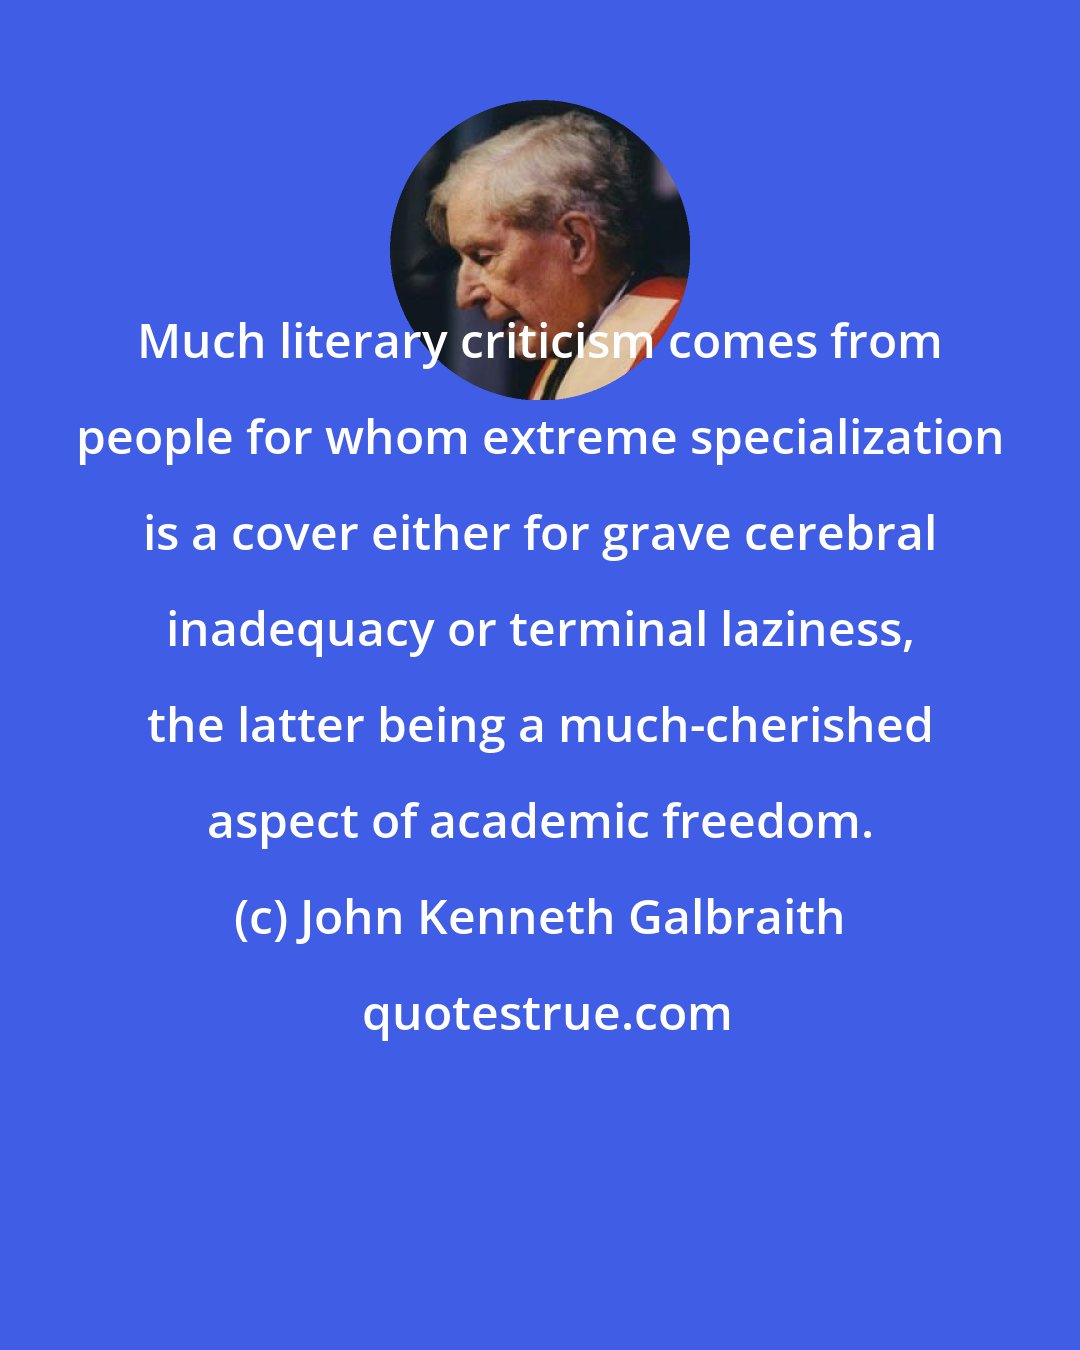 John Kenneth Galbraith: Much literary criticism comes from people for whom extreme specialization is a cover either for grave cerebral inadequacy or terminal laziness, the latter being a much-cherished aspect of academic freedom.